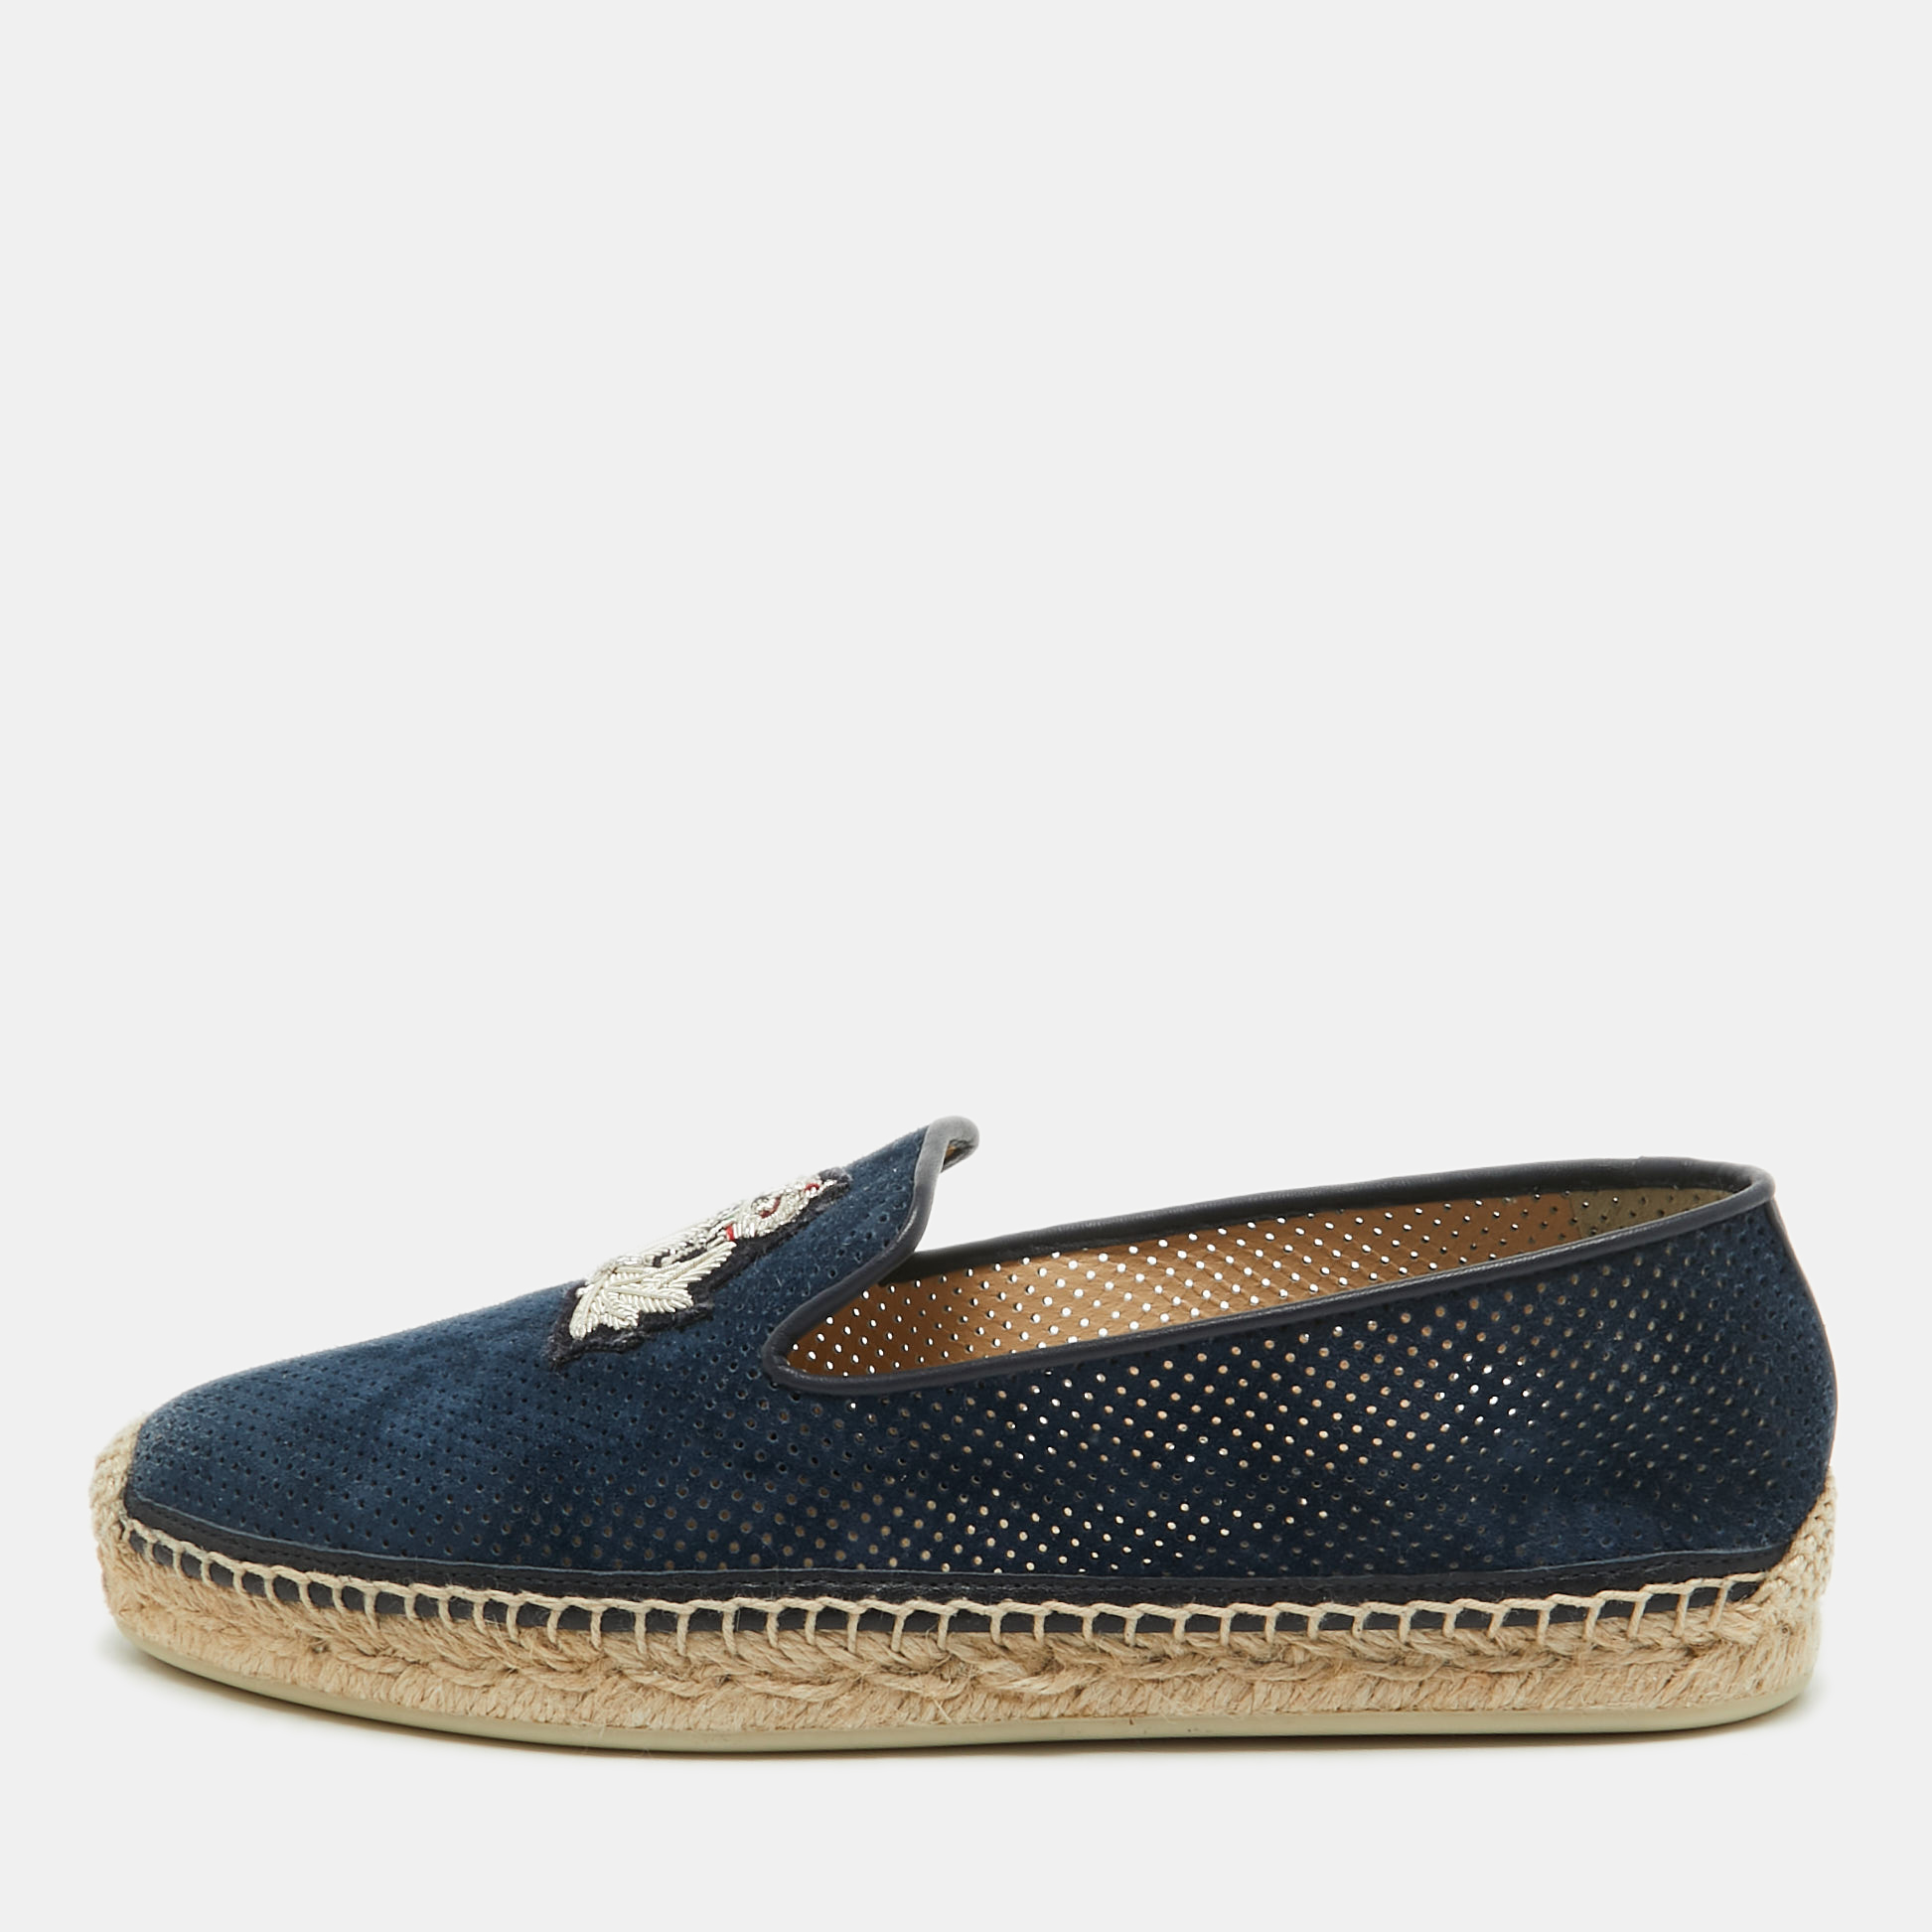 Pre-owned Christian Louboutin Blue Perforated Suede Nanou Orlato Espadrille Flats Size 37